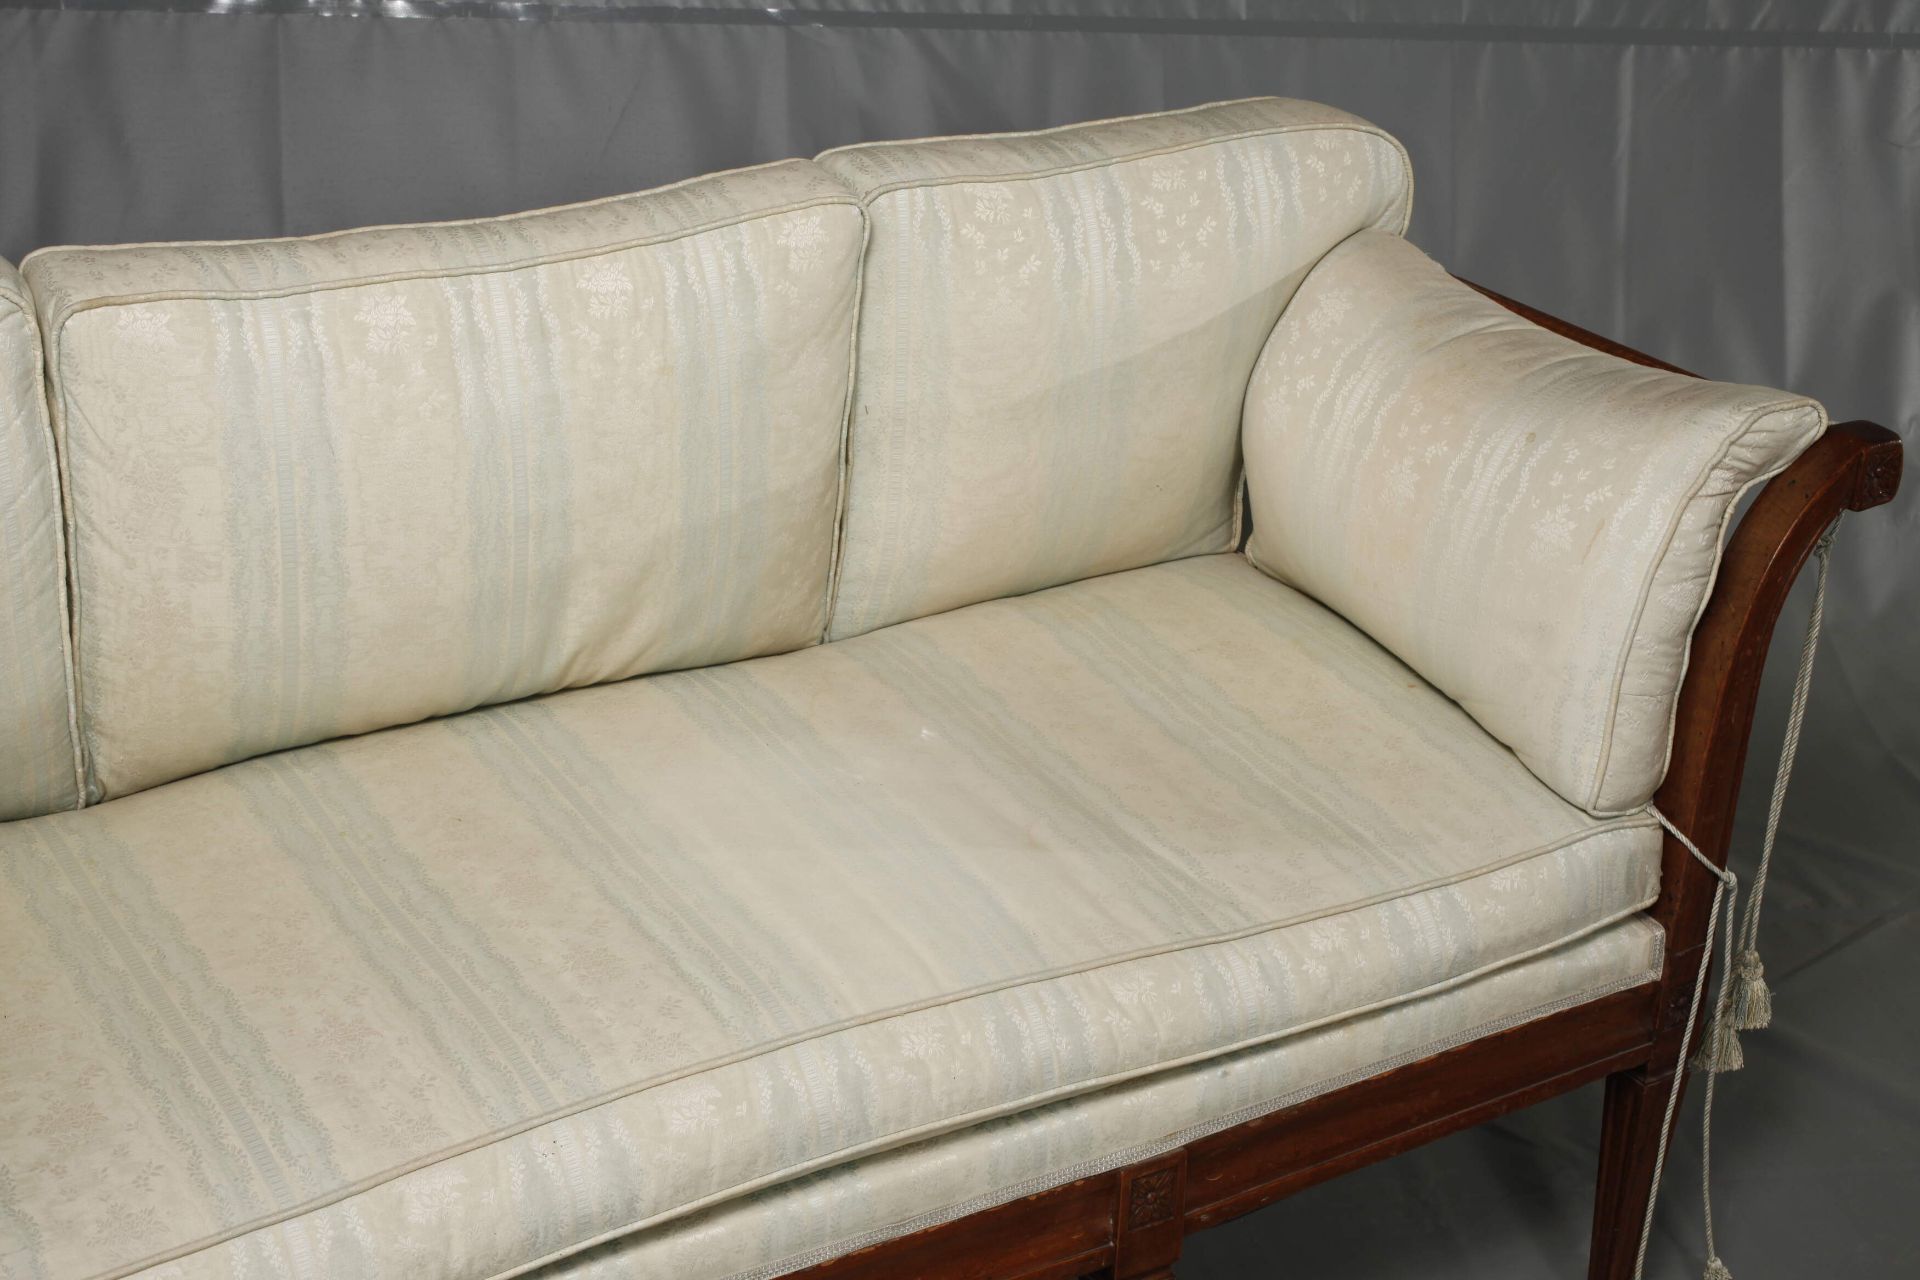 Louis Seize upholstered bench - Image 3 of 8